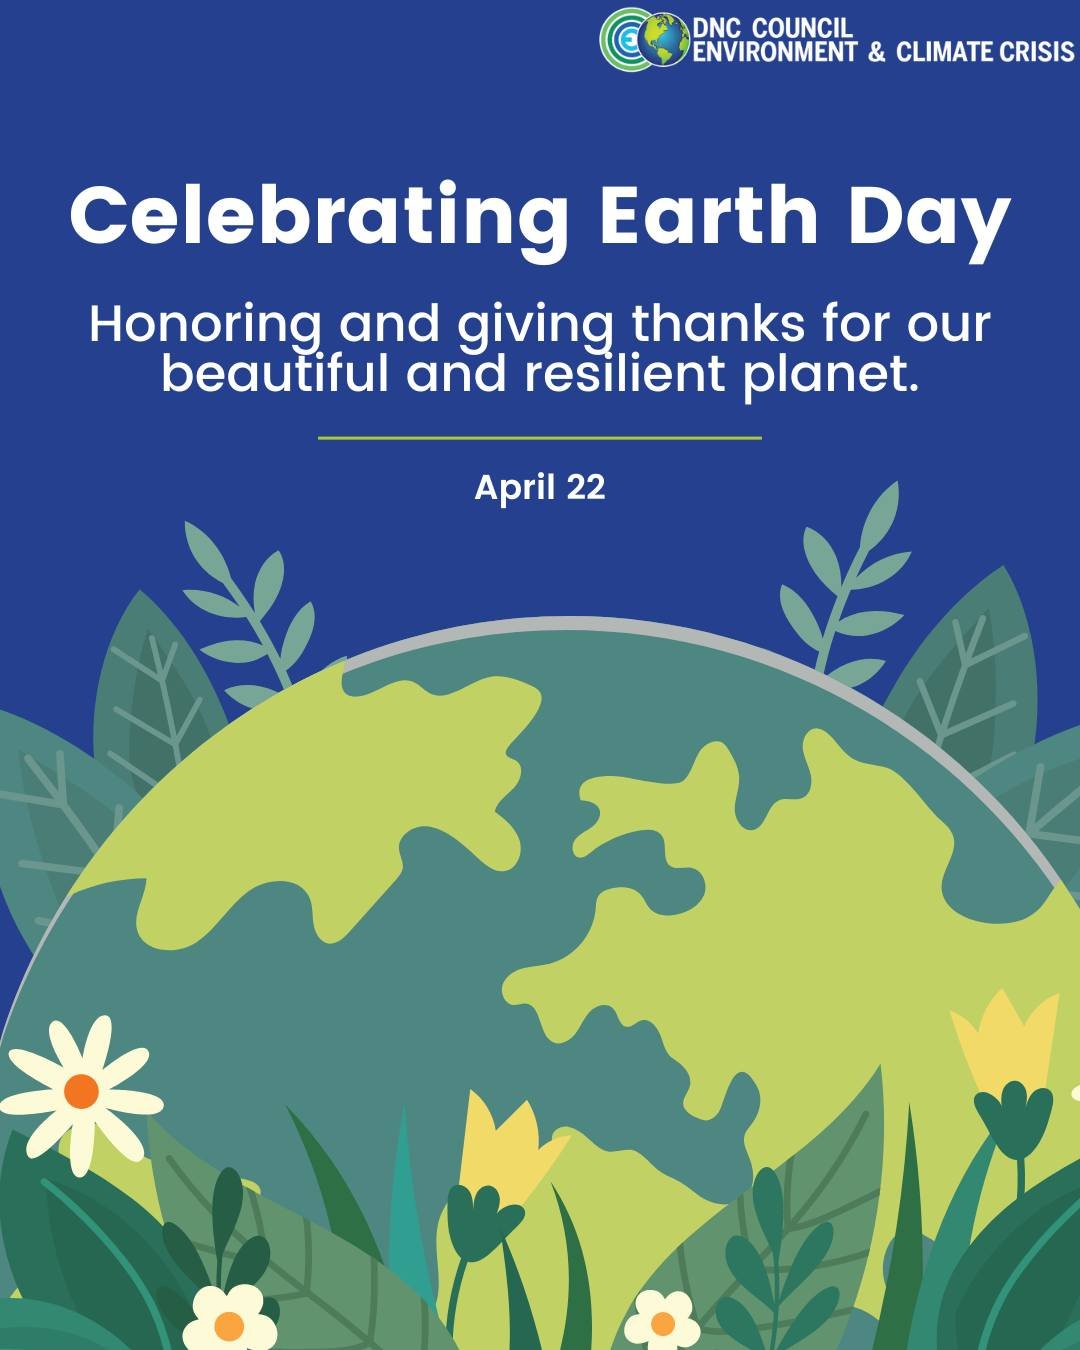 When we come together, we can elect leaders who will protect and preserve the beauty of our Earth for future generations.

This Earth Day, let's remember that every action counts.🌍

Find a local or virtual event on our map or host your own during ou